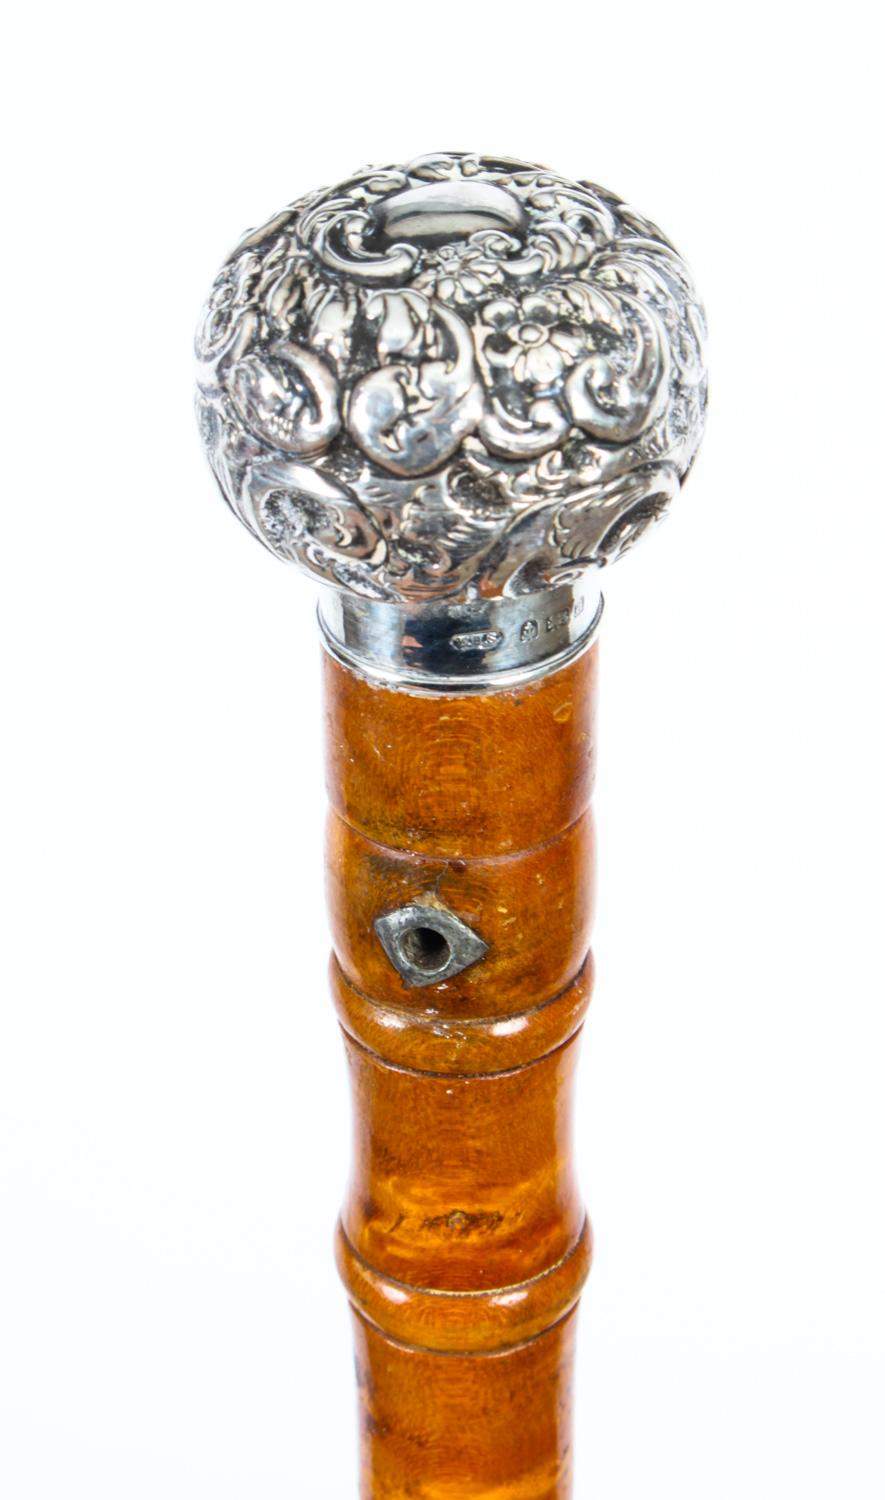 This is a beautiful antique English gentleman's birds eye maple and sterling silver pommel walking stick bearing hallmarks for Birmingham dated 1903.
 
The striking stick features an ornate silver pommel embossed with scrolling foliage on a gentle